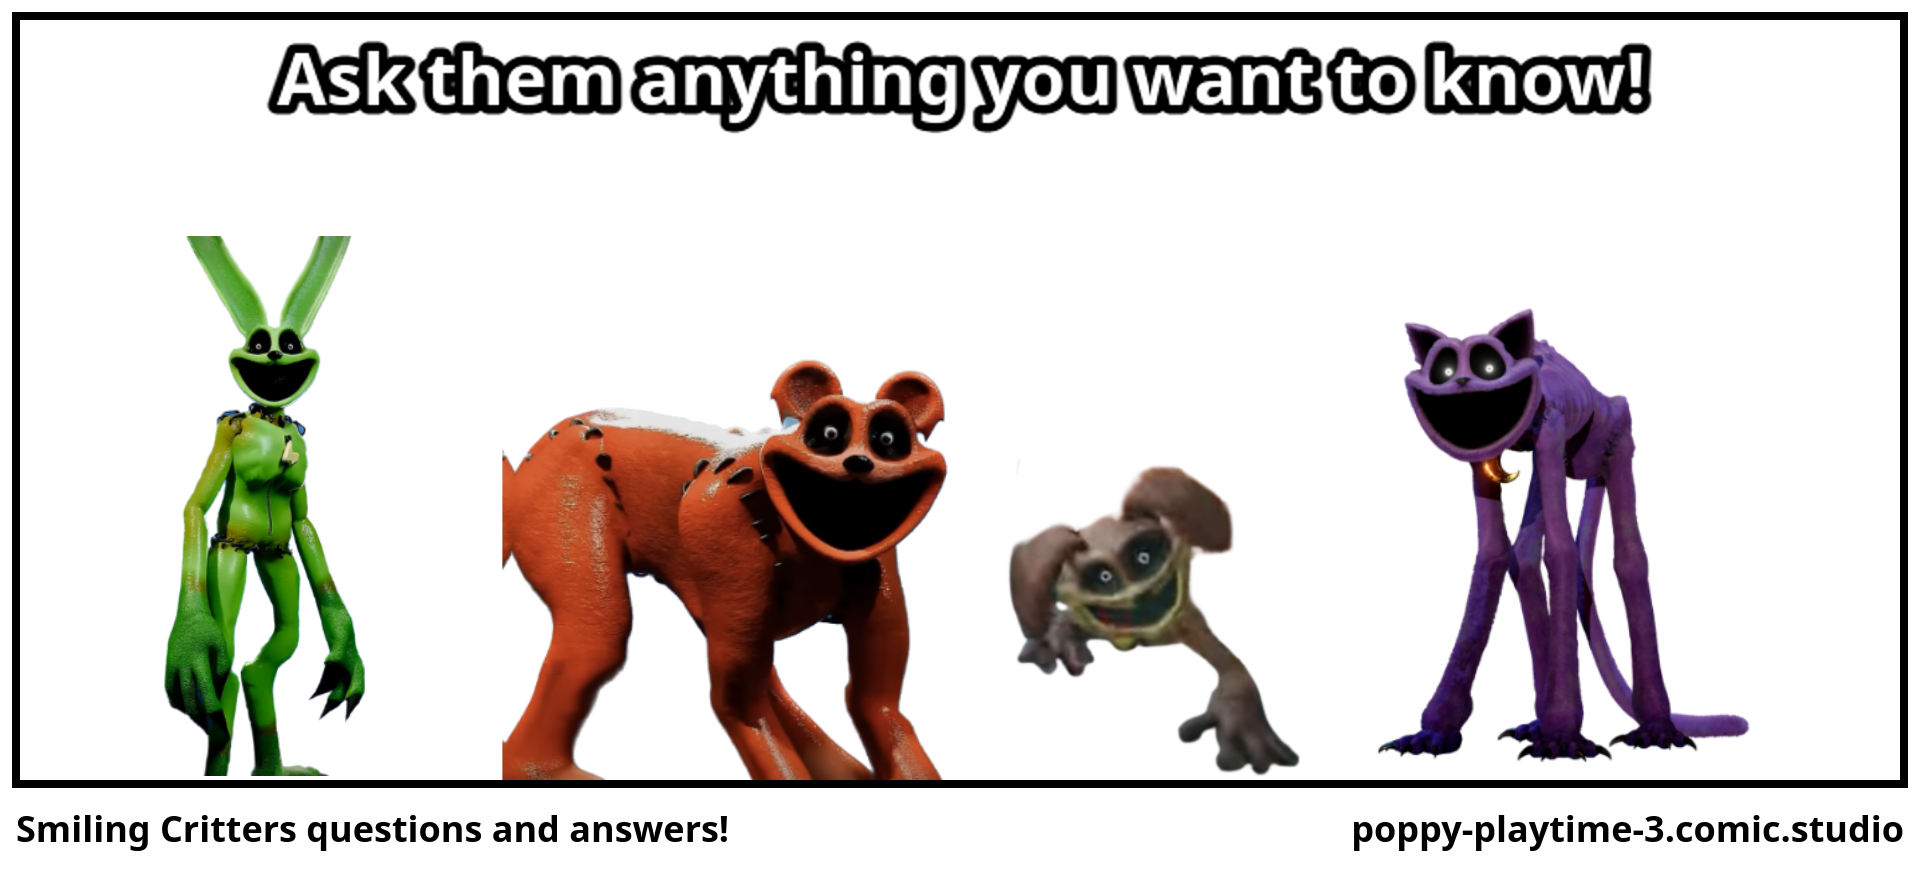 Smiling Critters questions and answers!